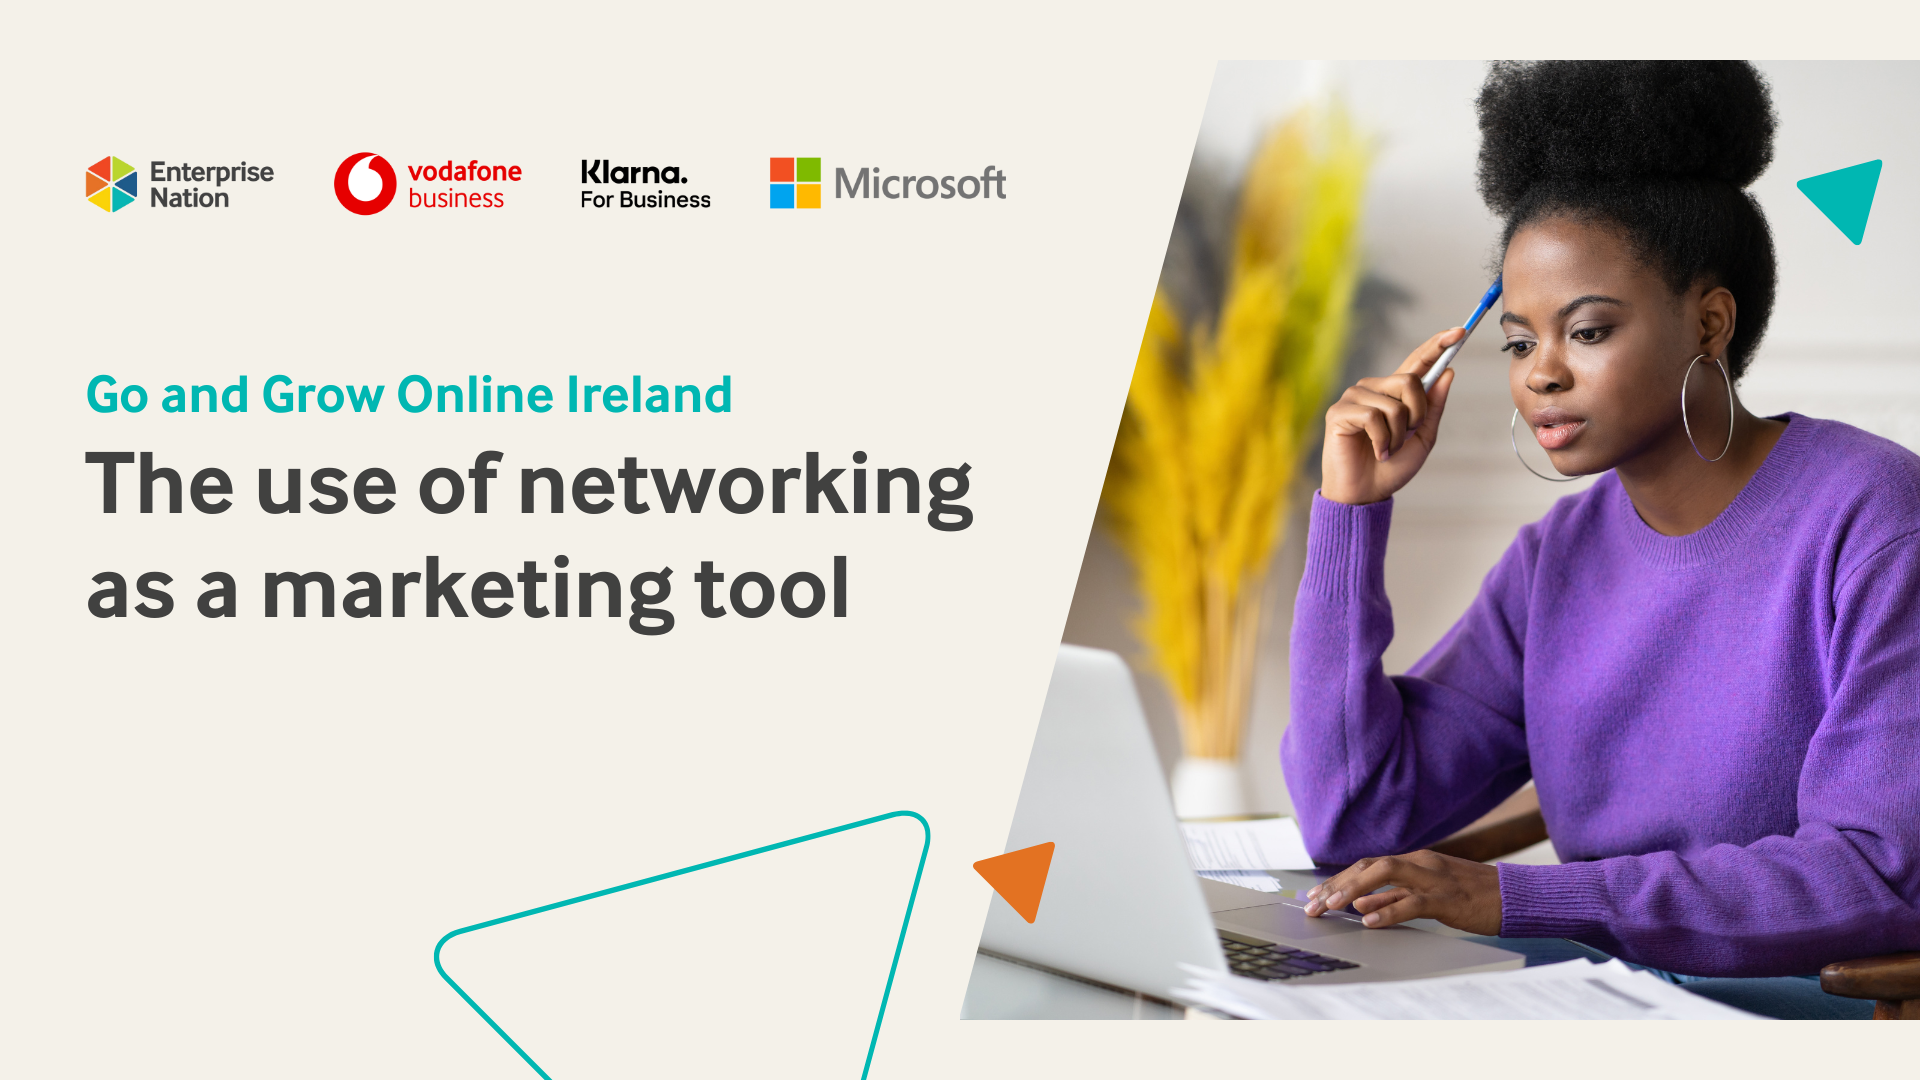 Go and Grow Online: The use of networking as a marketing tool